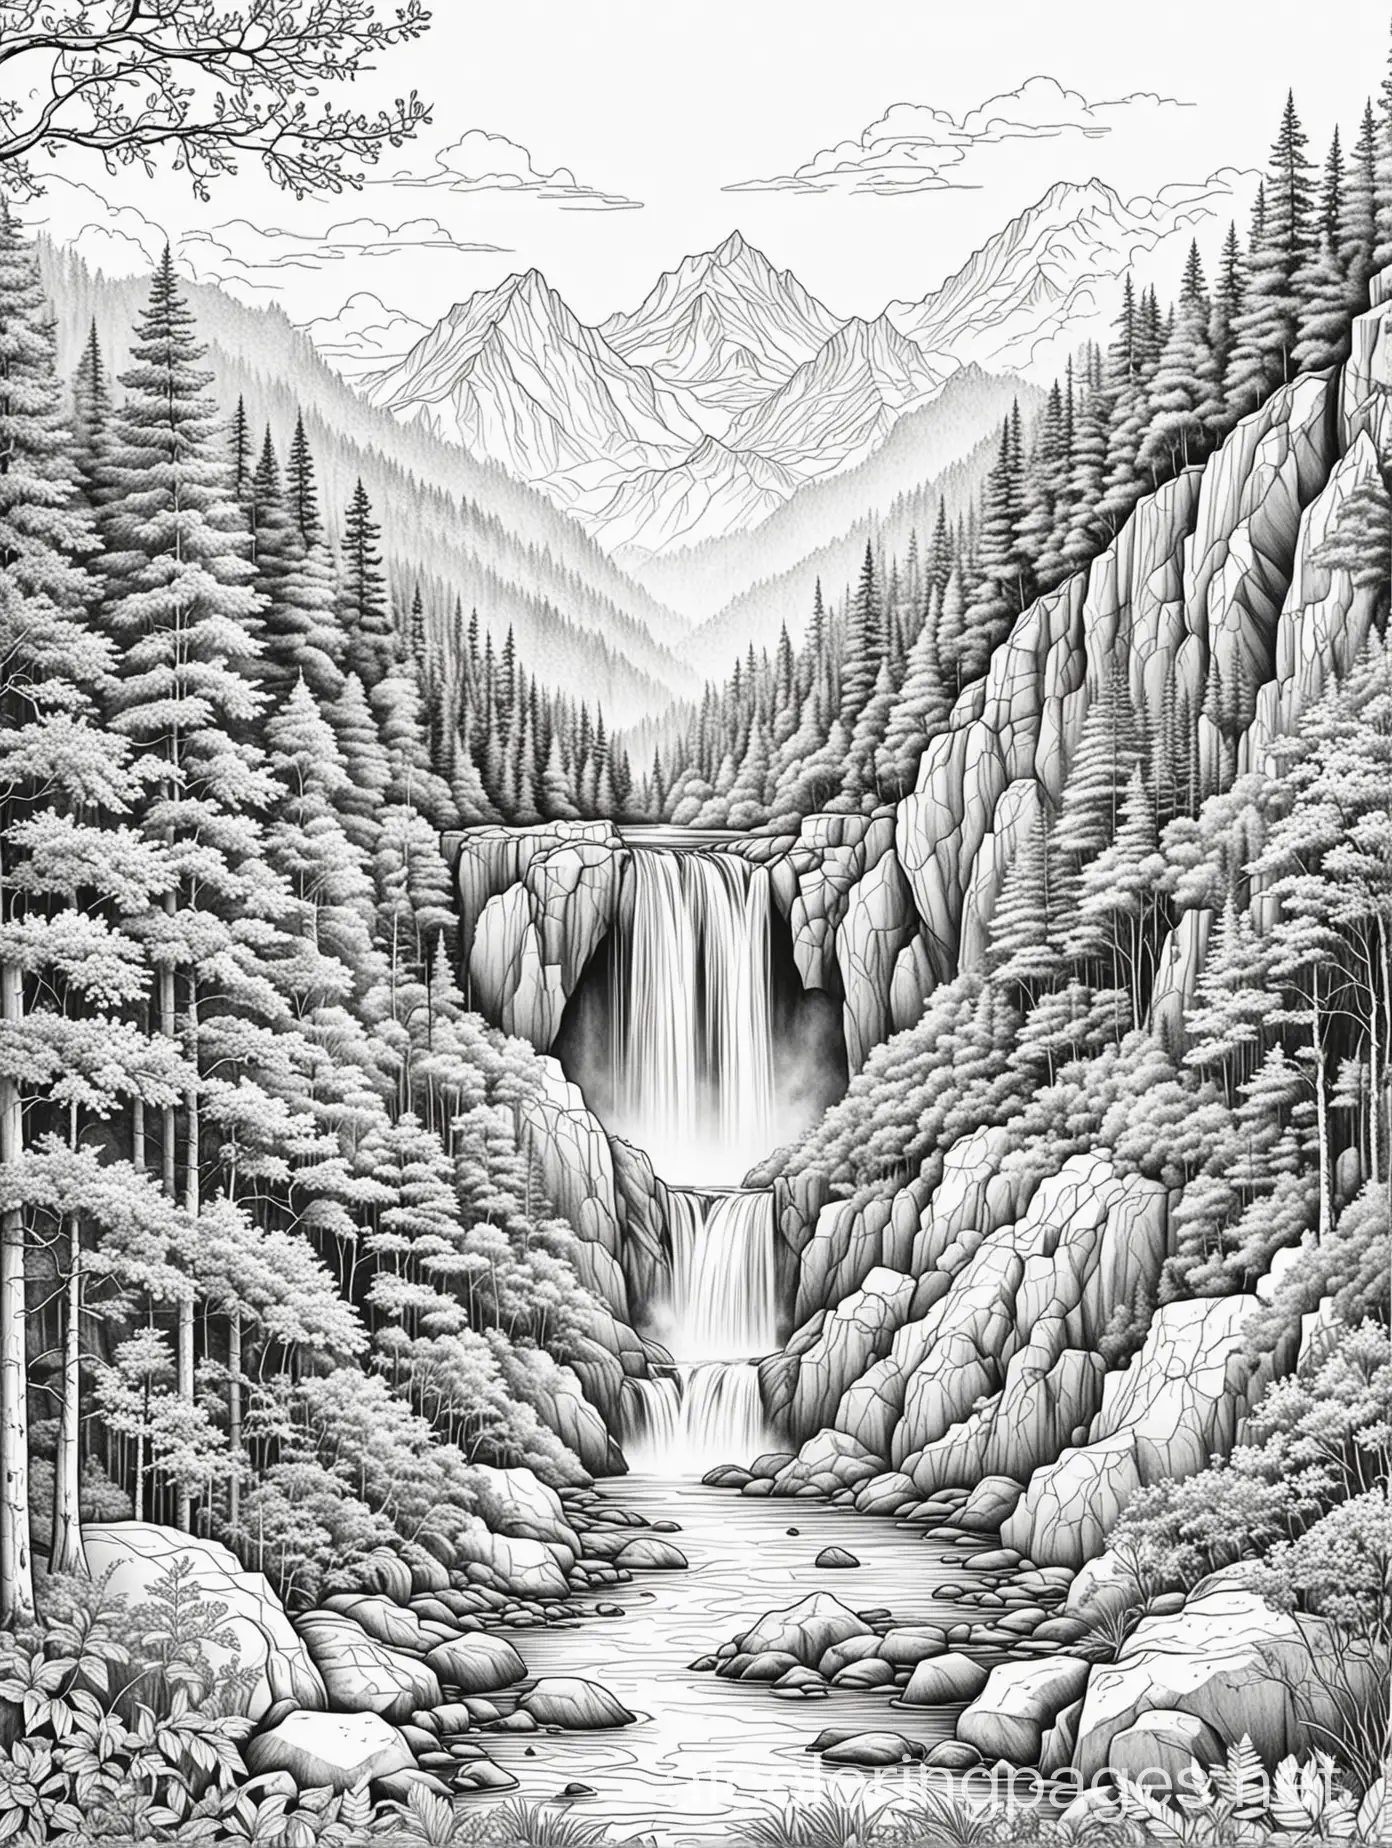  coloring page, for adults, beautiful mountain scenery with forests and waterfall, black and white, lineart, white background, Coloring Page, black and white, line art, white background, Simplicity, Ample White Space. The background of the coloring page is plain white to make it easy for young children to color within the lines. The outlines of all the subjects are easy to distinguish, making it simple for kids to color without too much difficulty